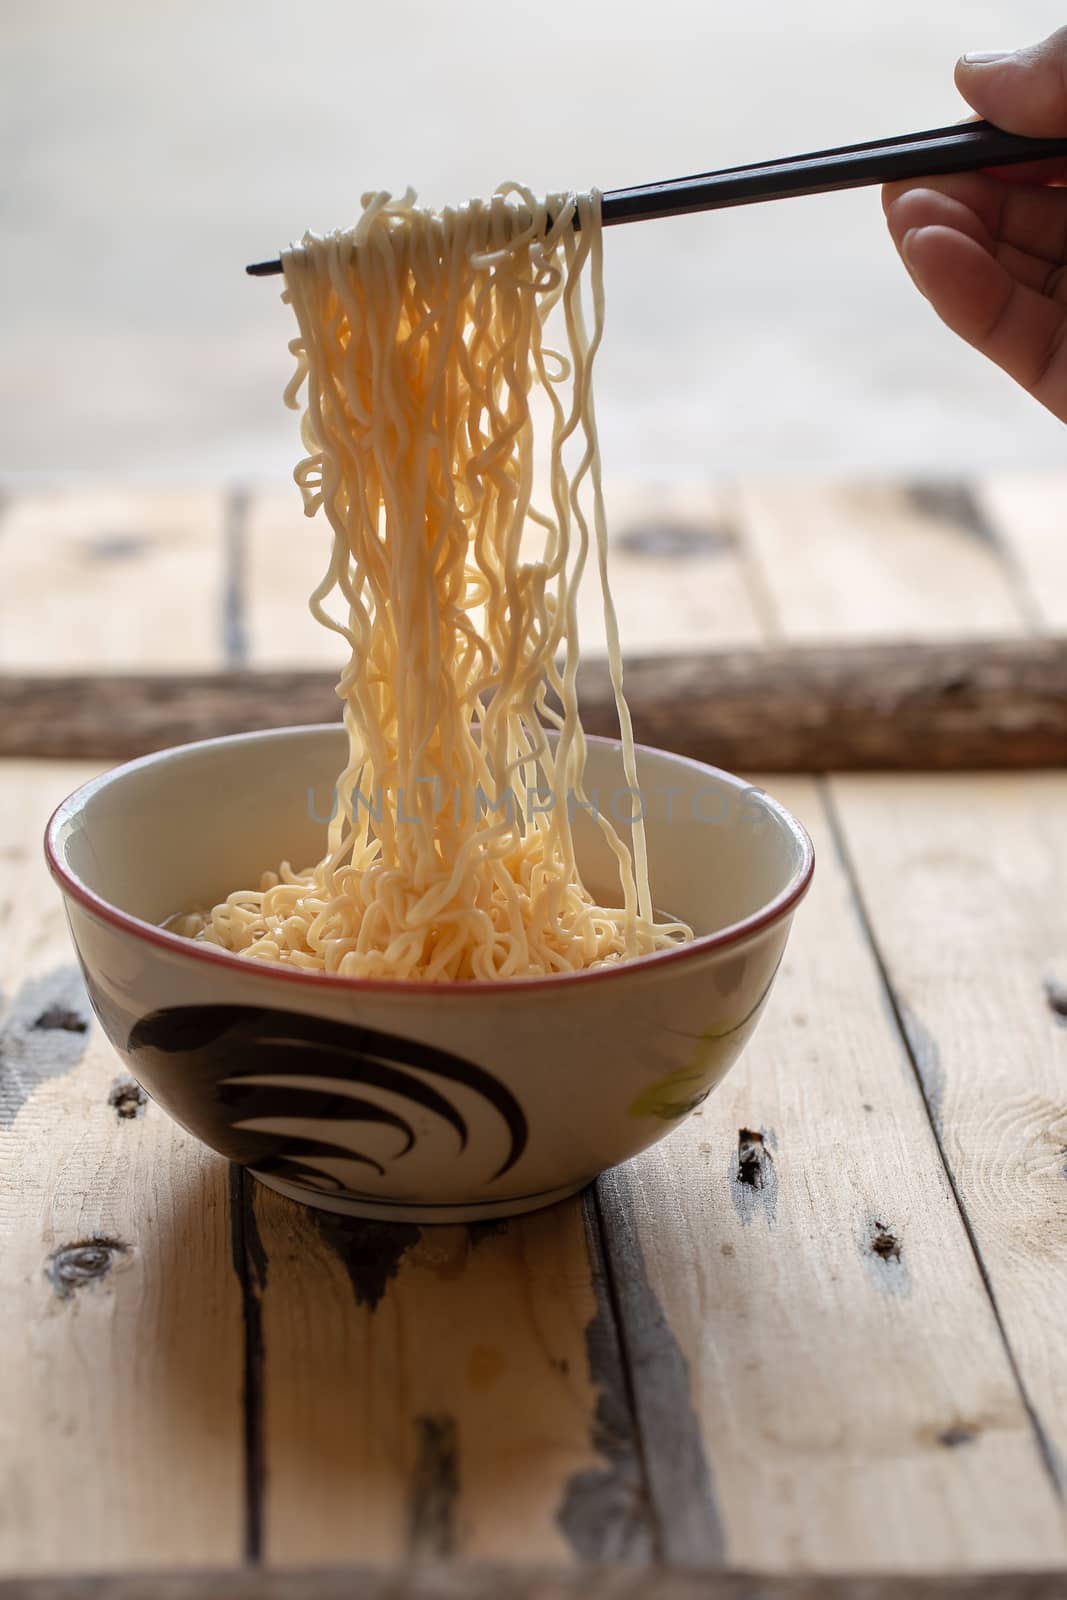 Hand uses chopsticks to pickup tasty noodles in bowl on wooden b by kaiskynet